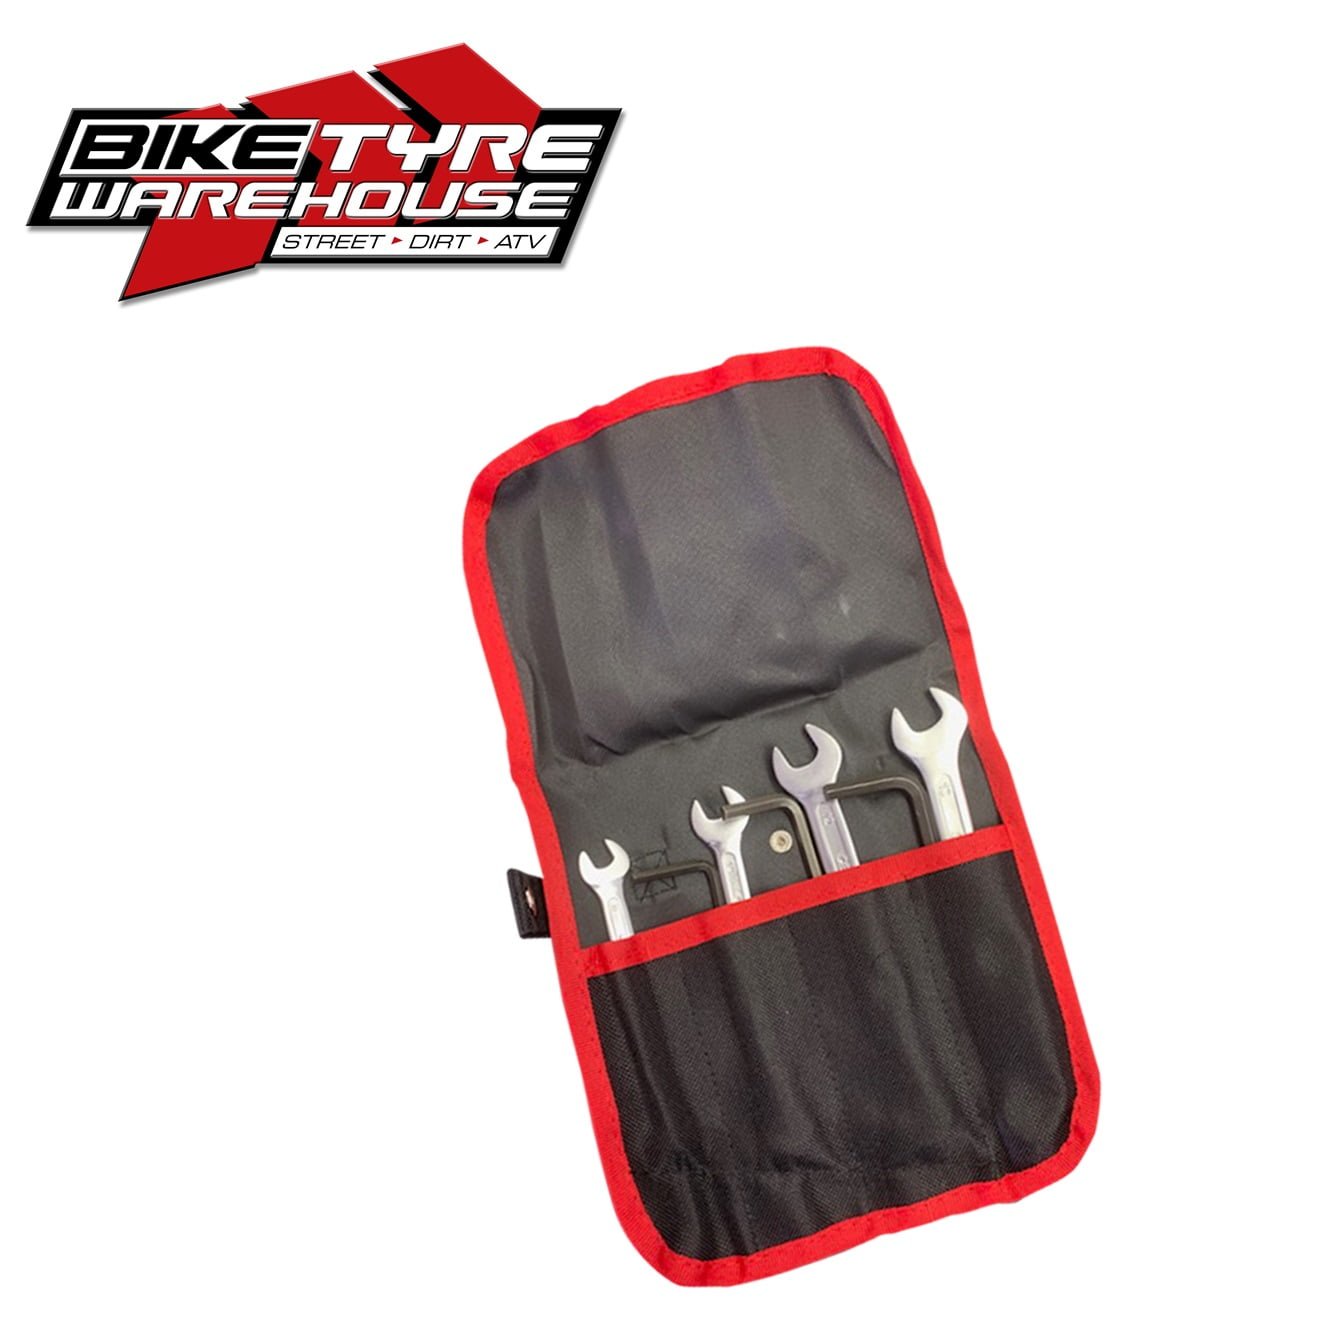 Bike Tyre Warehouse Prizes Gedore Lost Spanner Tool and Allen Key Kit